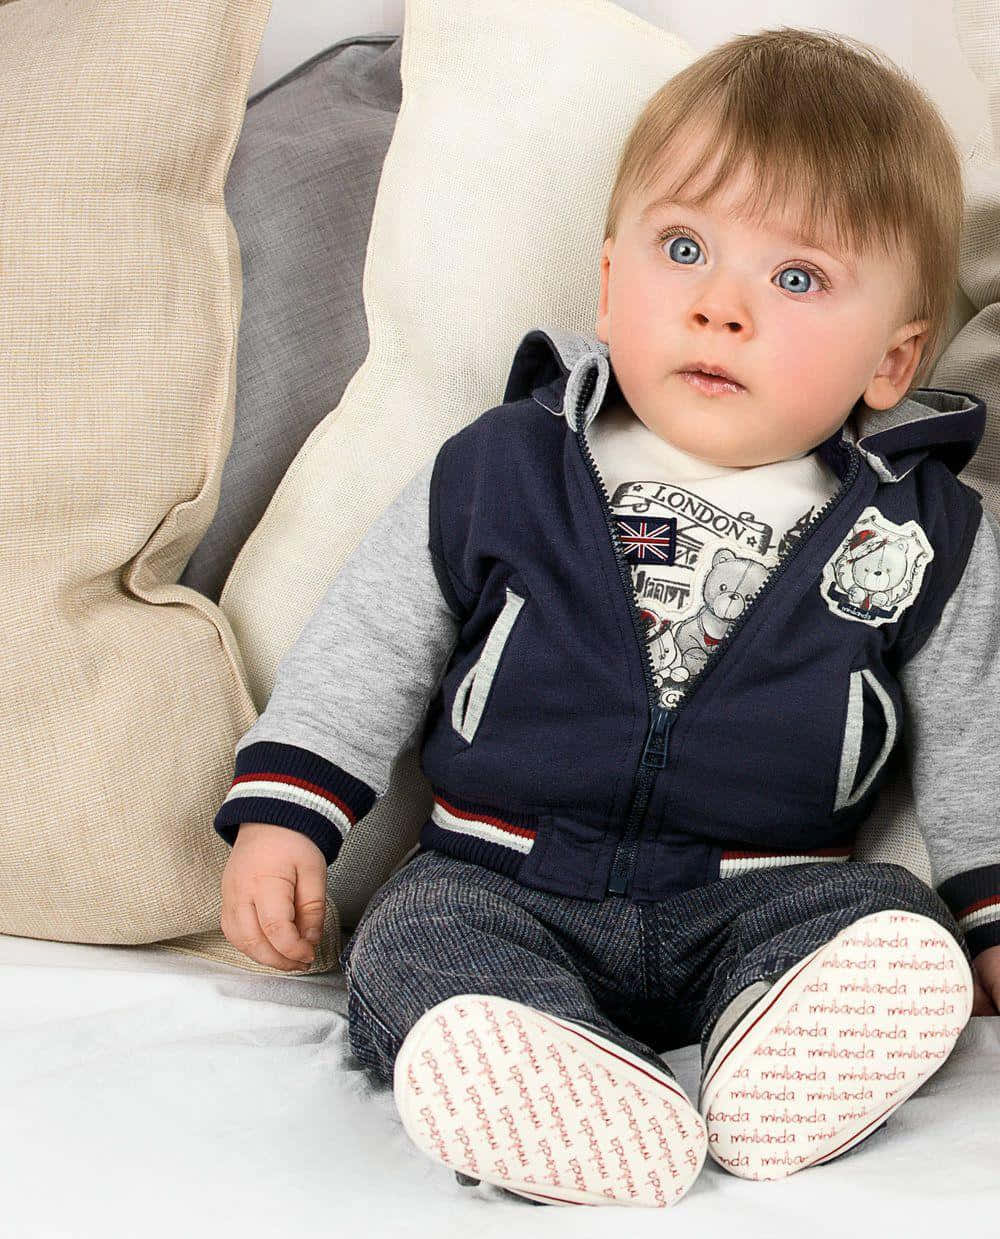 Download Cute Baby Stylish Boy Sitting Wallpaper | Wallpapers.com